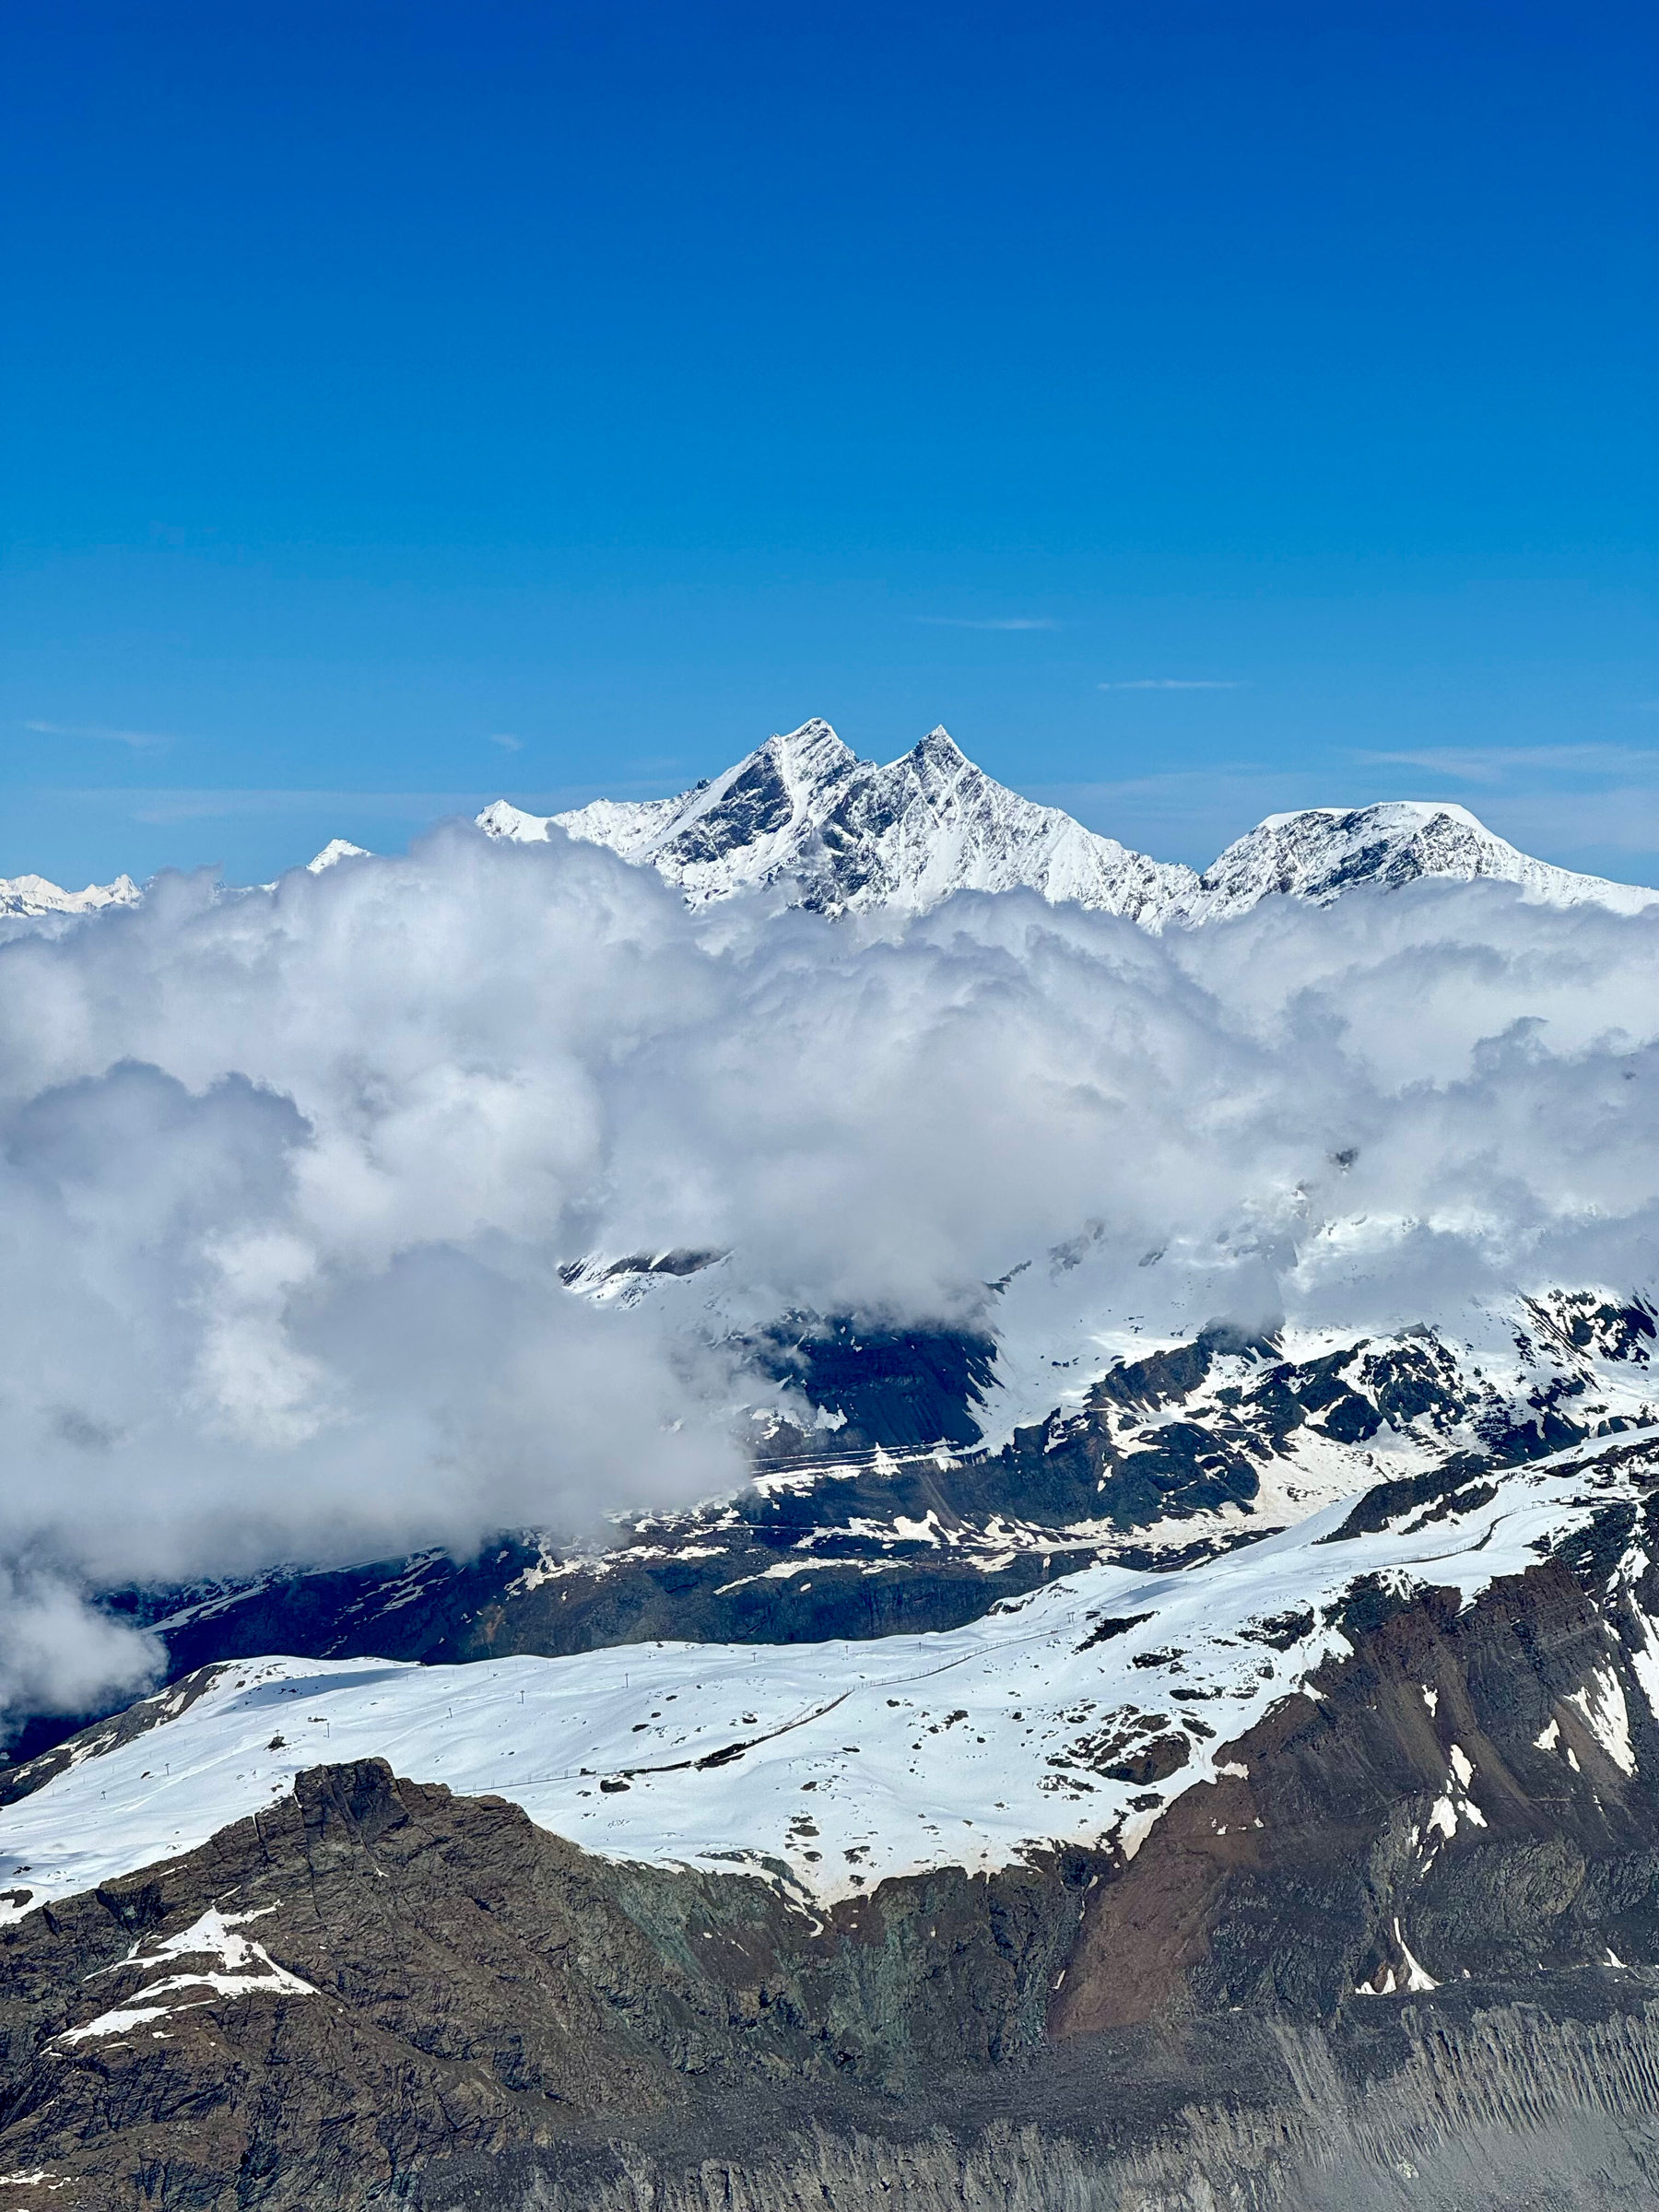 Aerial view of snow-capped mountains piercing through a blanket of clouds under a clear blue sky.